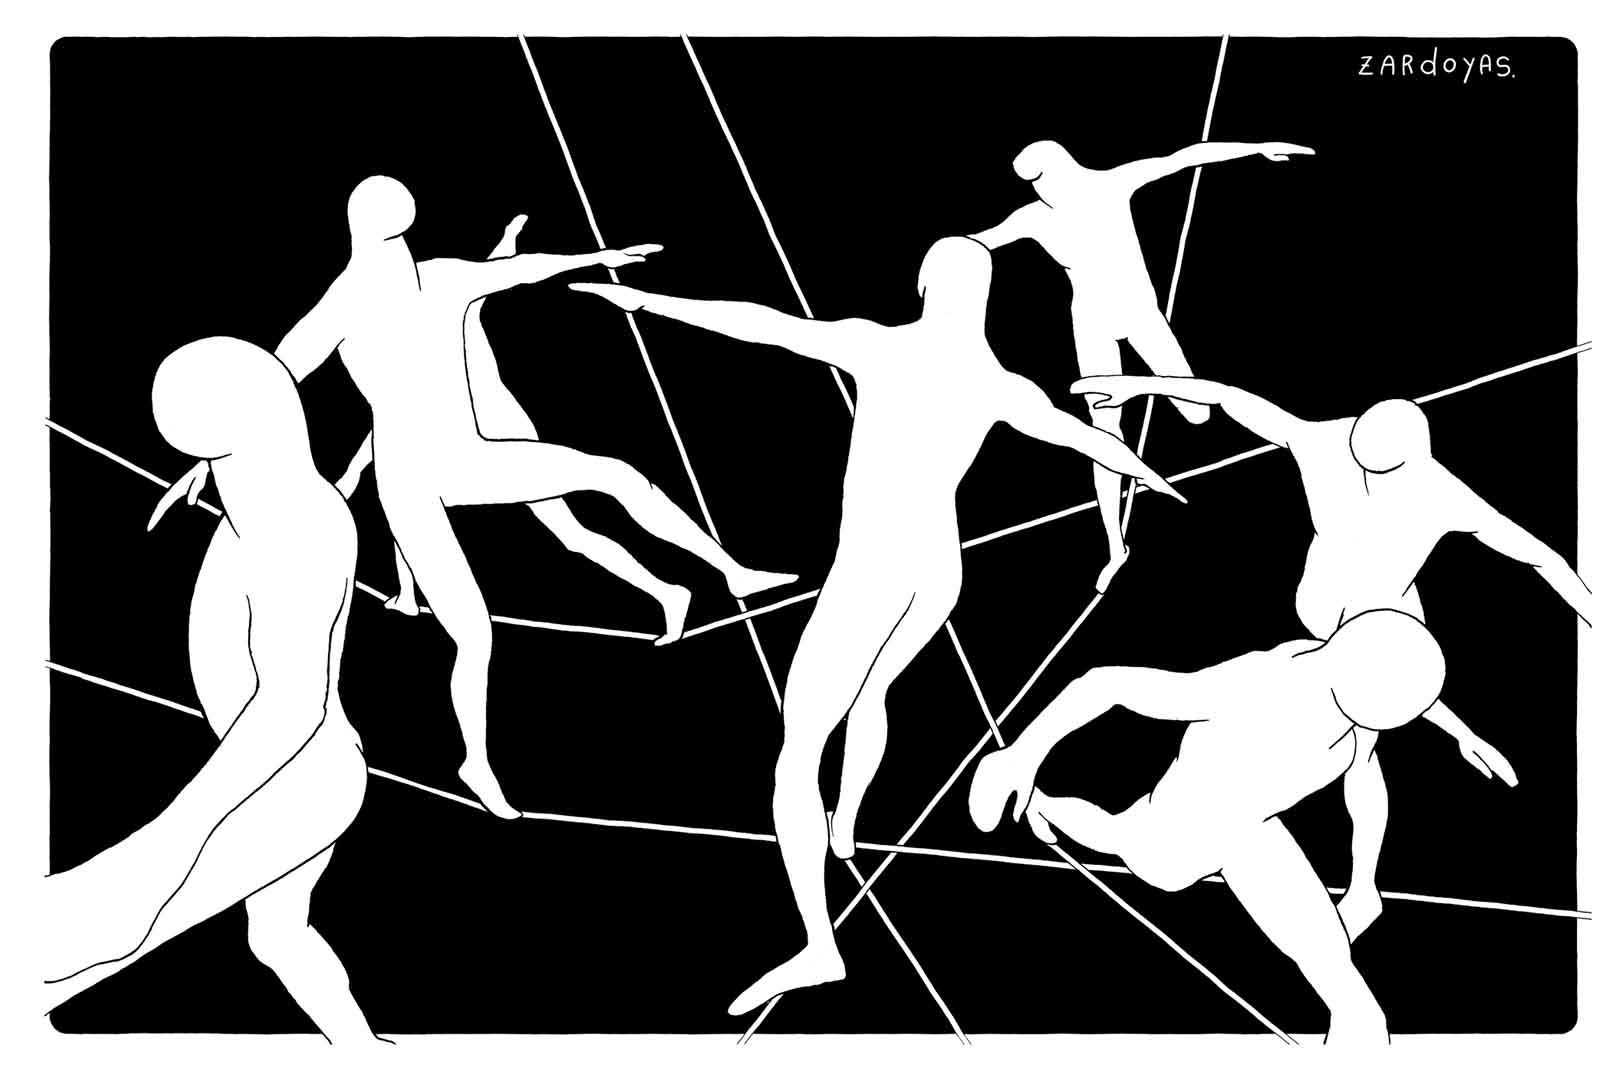 Illustration by Ramiro Zardoya. There are seven faceless people walking across interlinked tight ropes. 